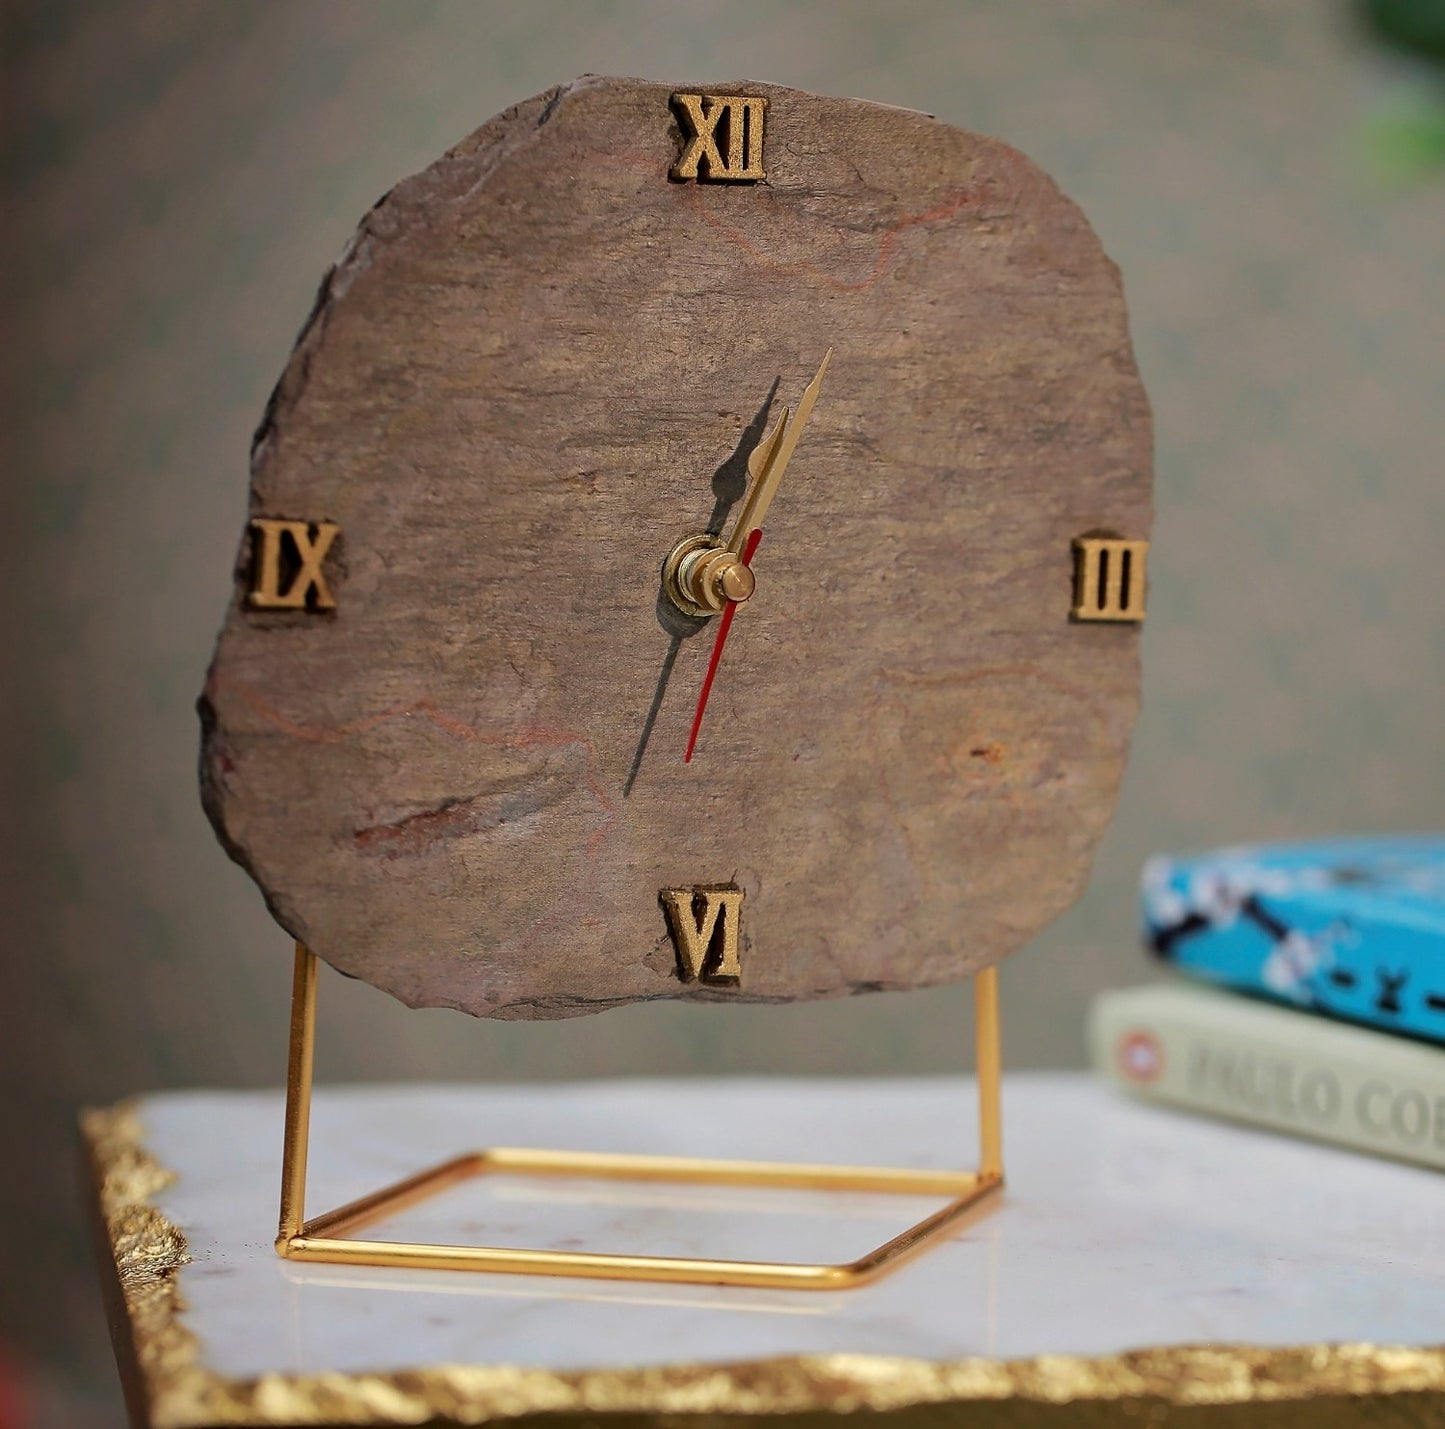 Peacock Slate Desktop Clock with Metal Stand Perfect Table Clock for Home Office Ideal Table decor for Housewarming and Christmas Gifts - Brown